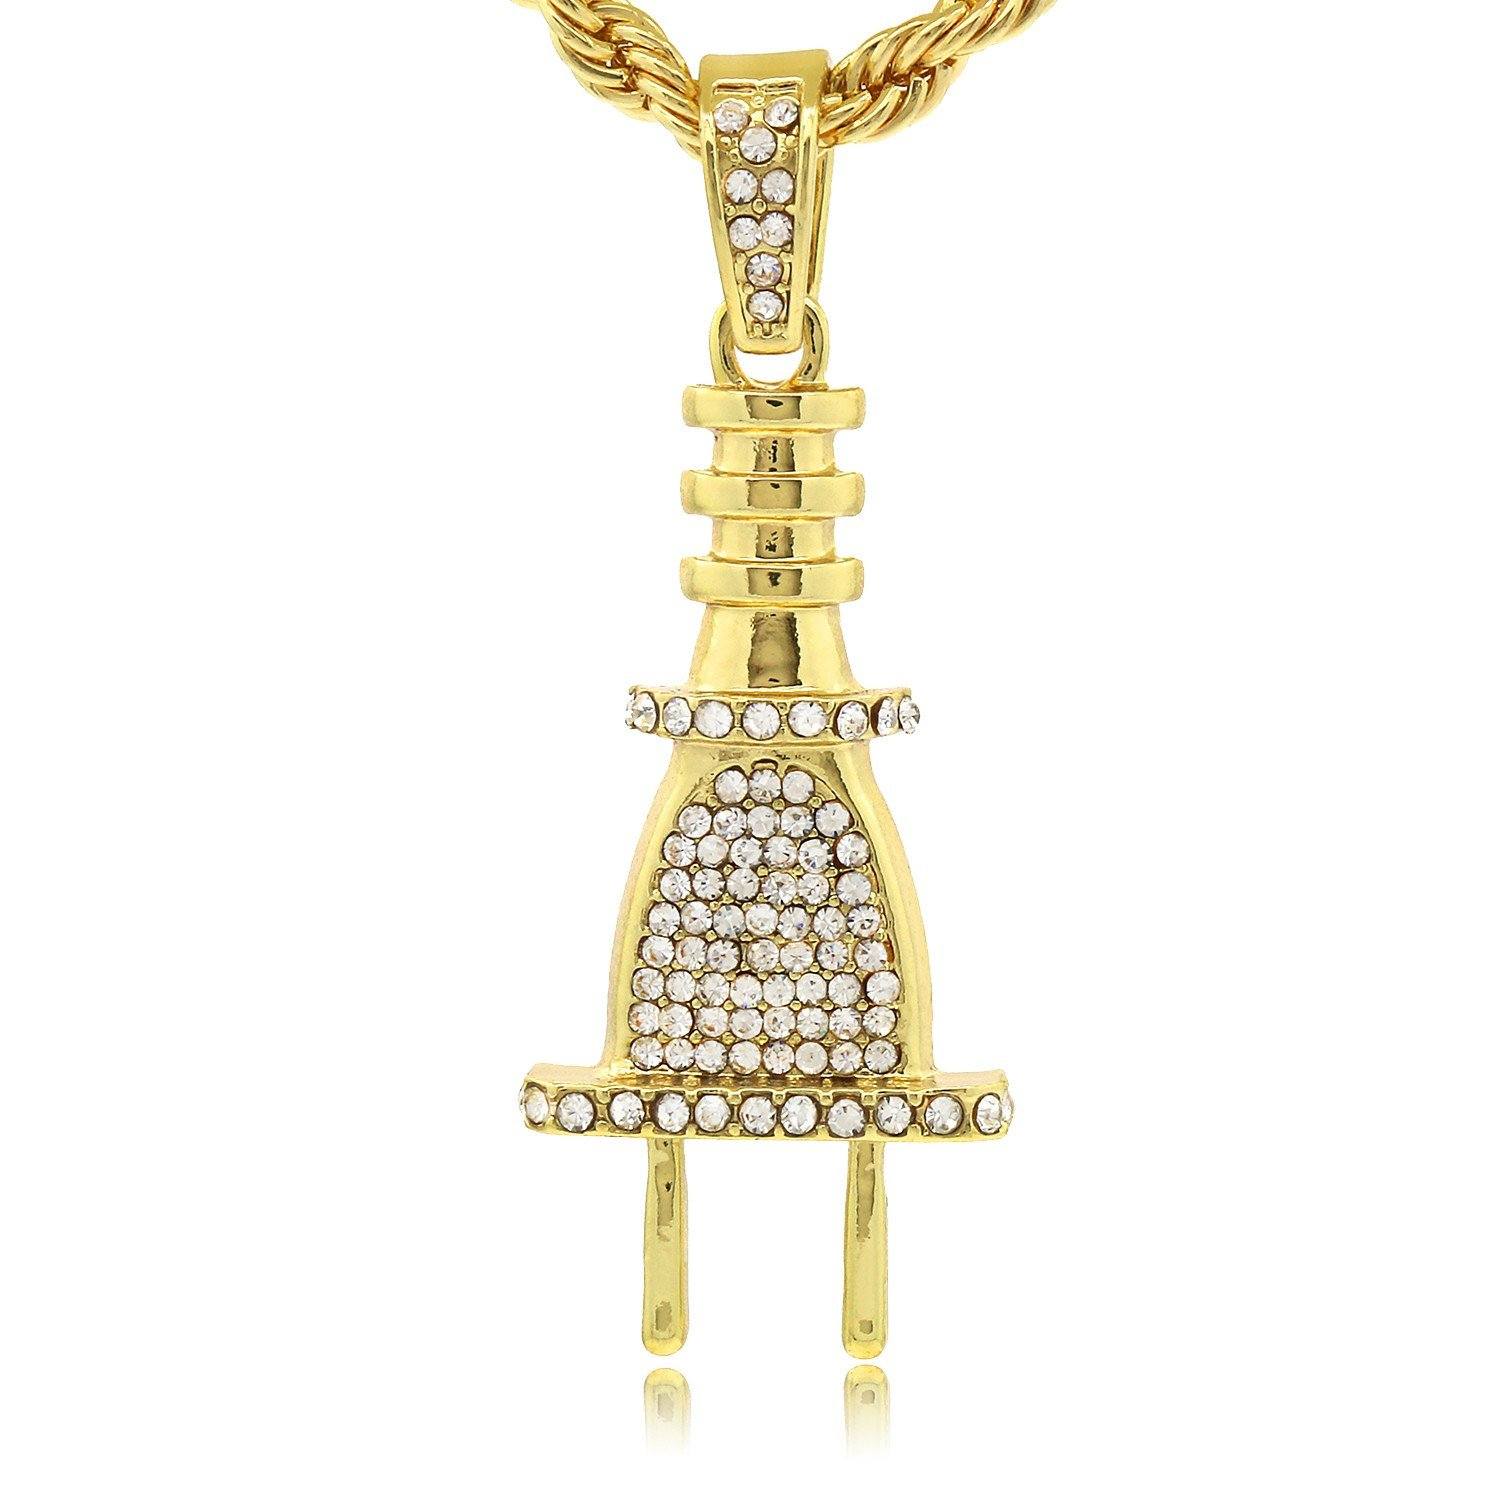 CZ FLAT PLUG PENDANT3 WITH GOLD ROPE CHAIN